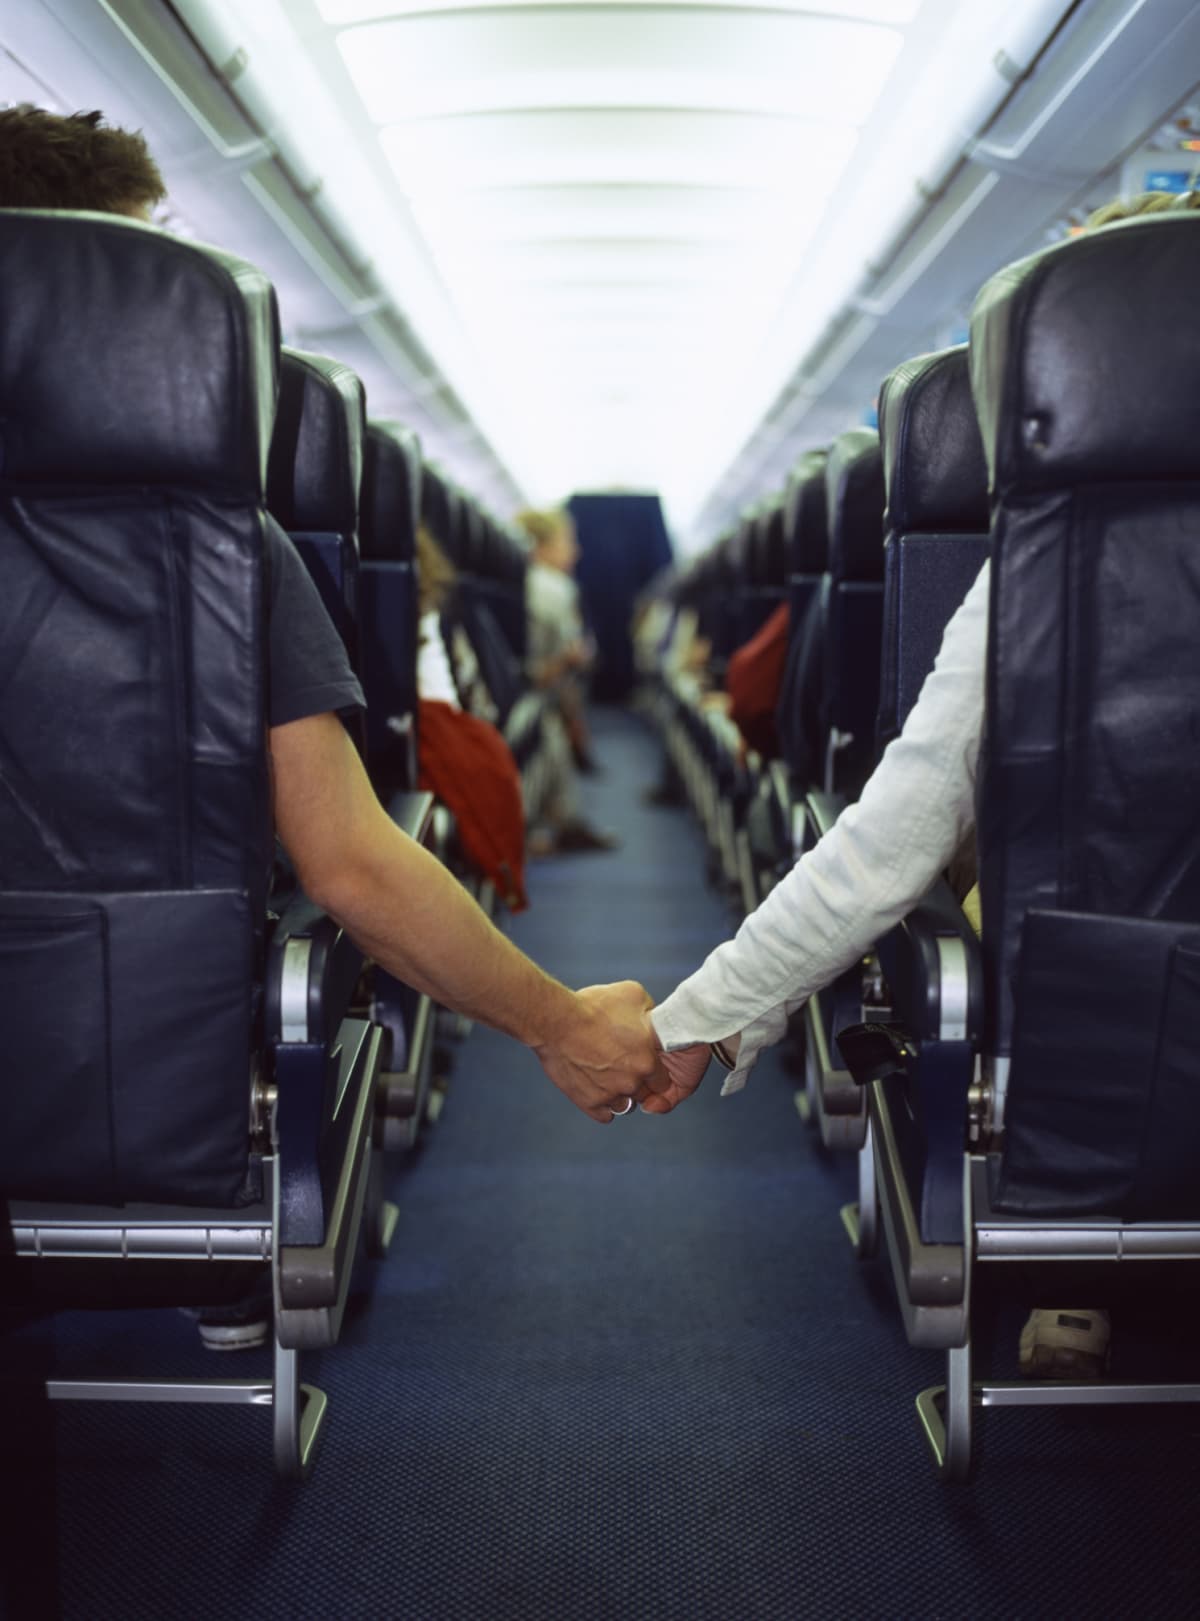 A man and woman hold hands across the airplane aisle